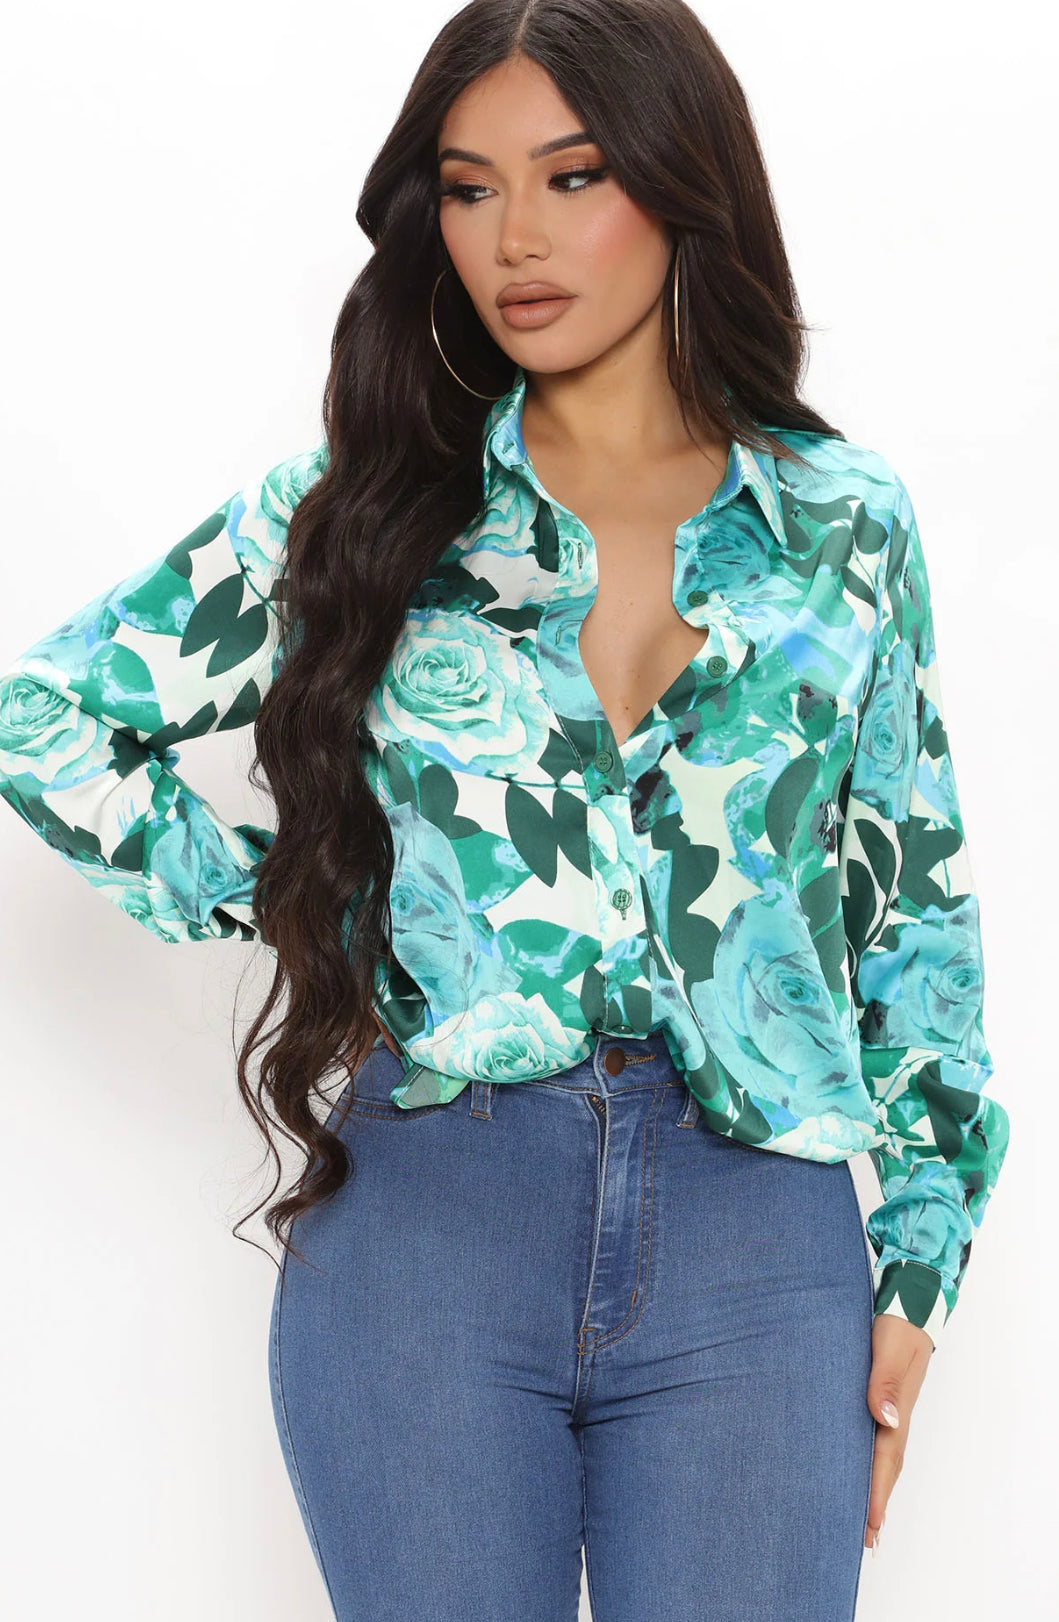 Teal blossom blouse